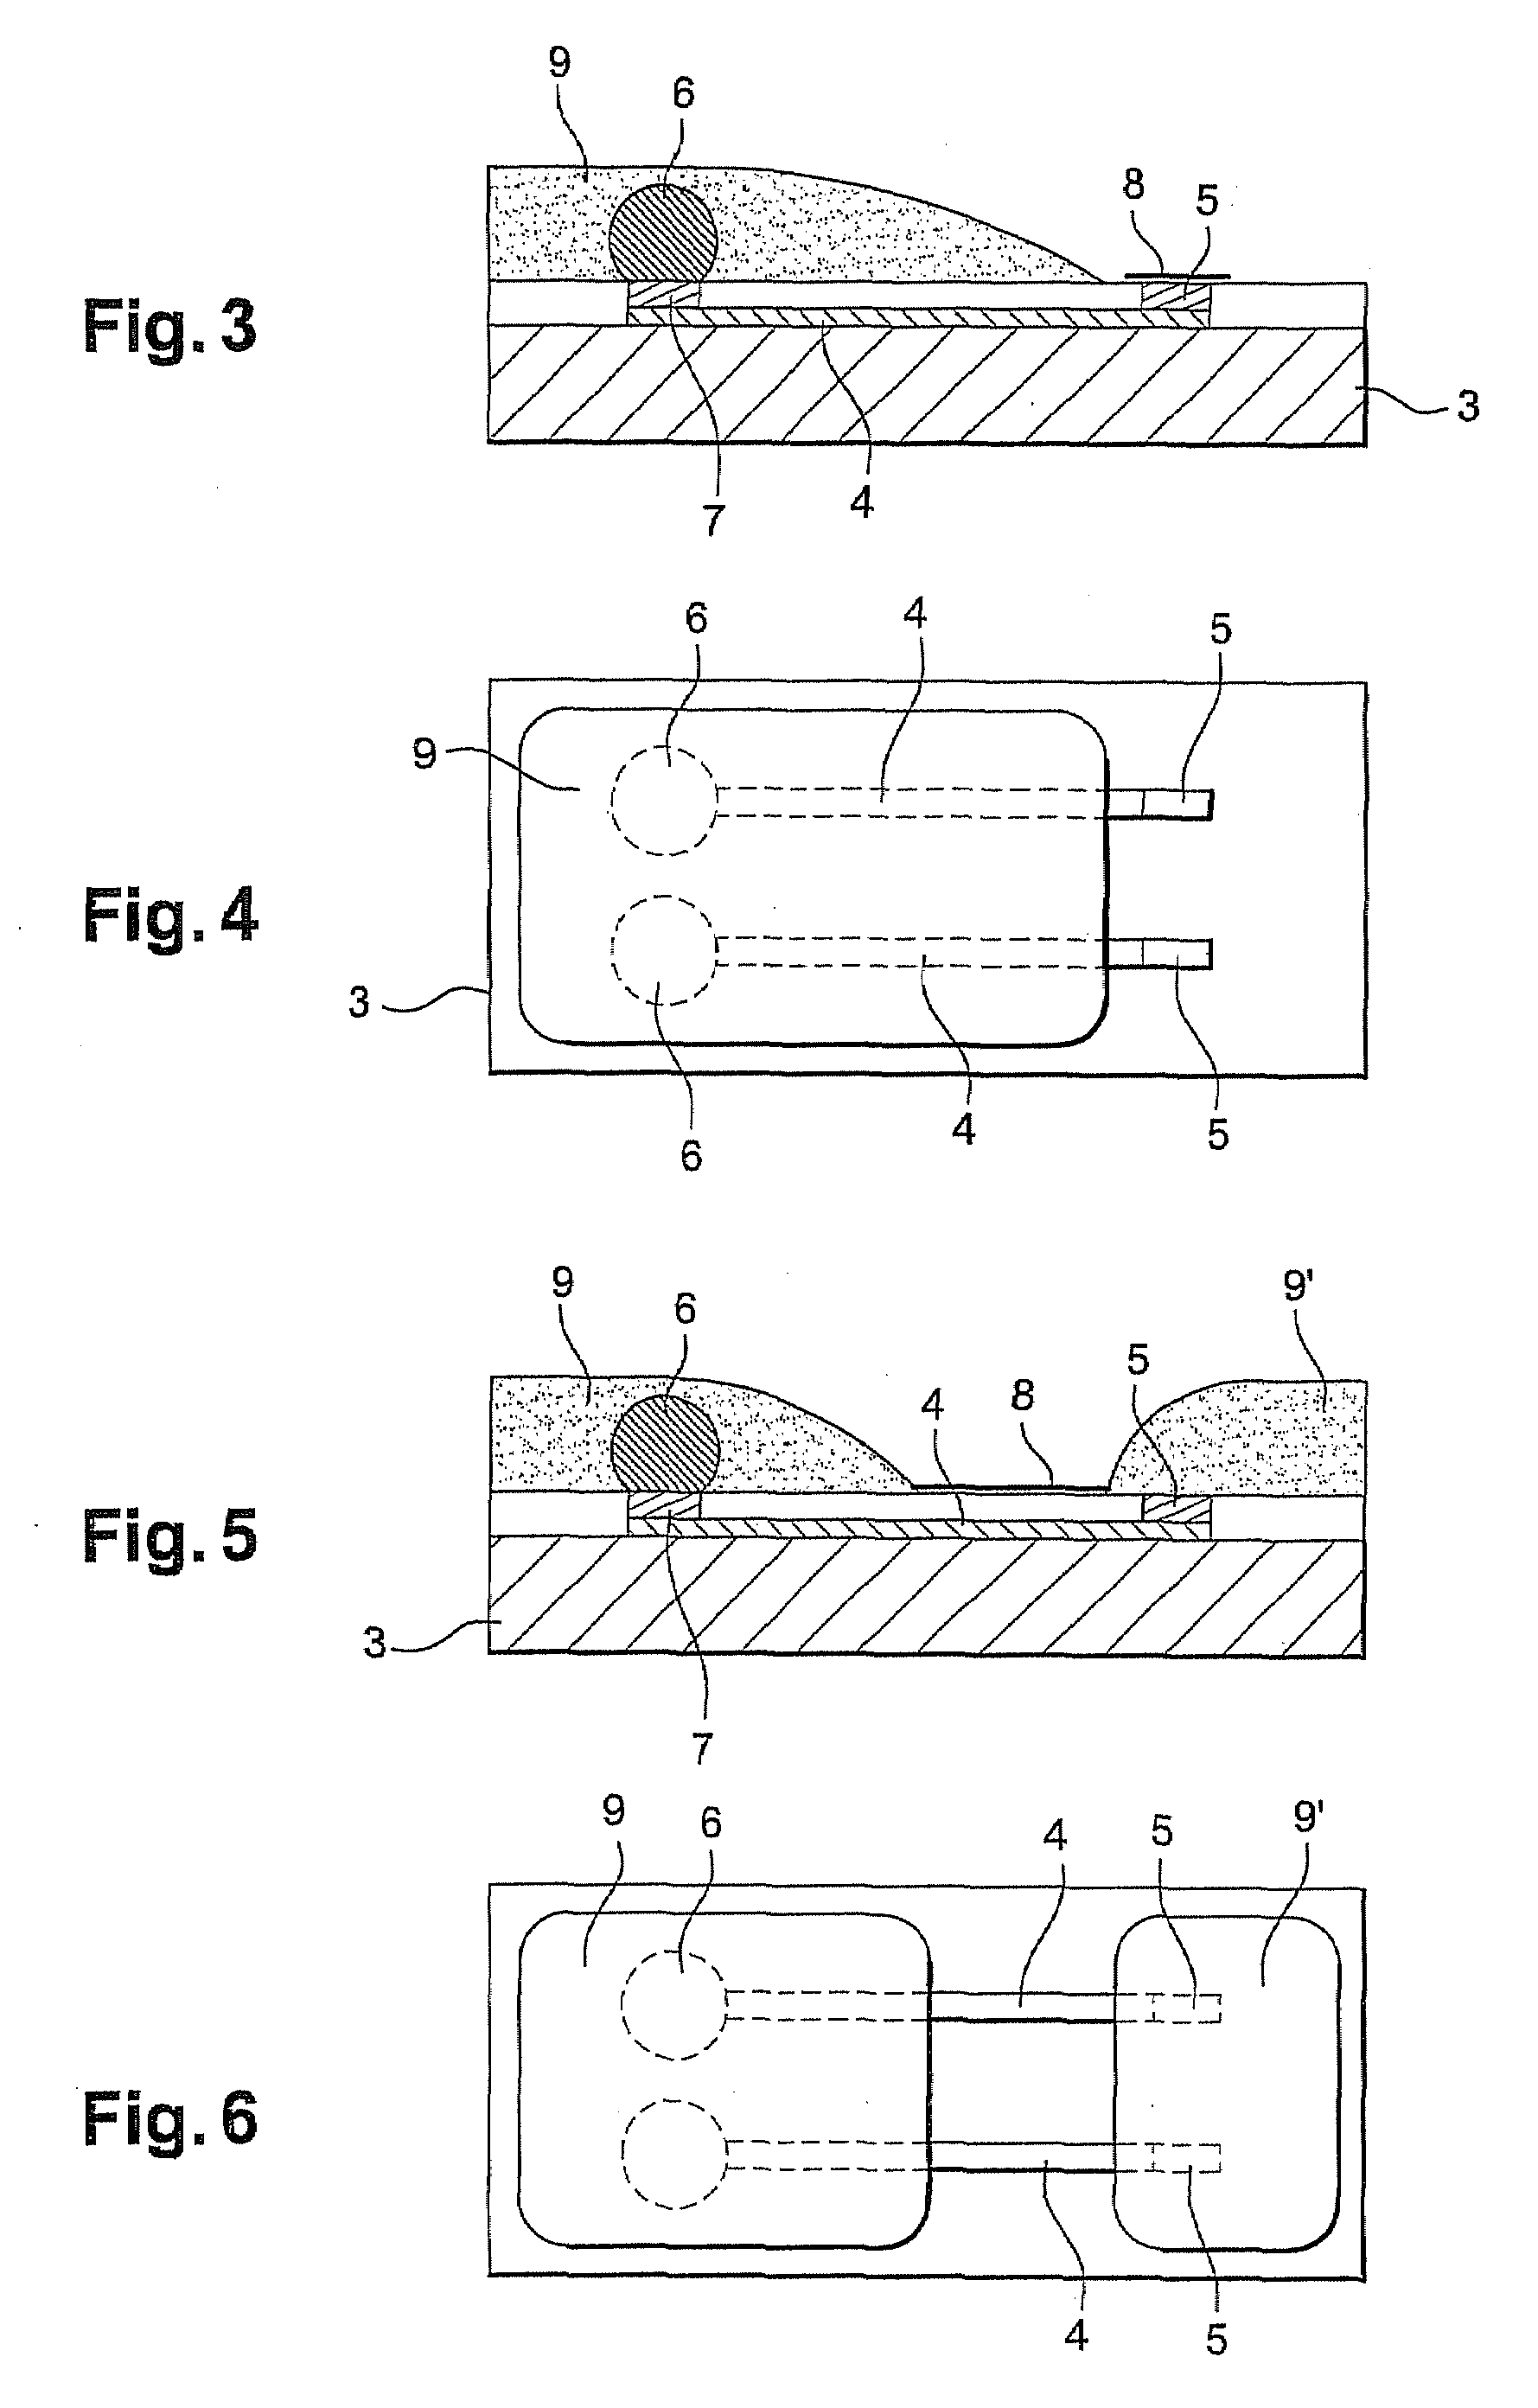 Method for soldering two components together by using a solder material